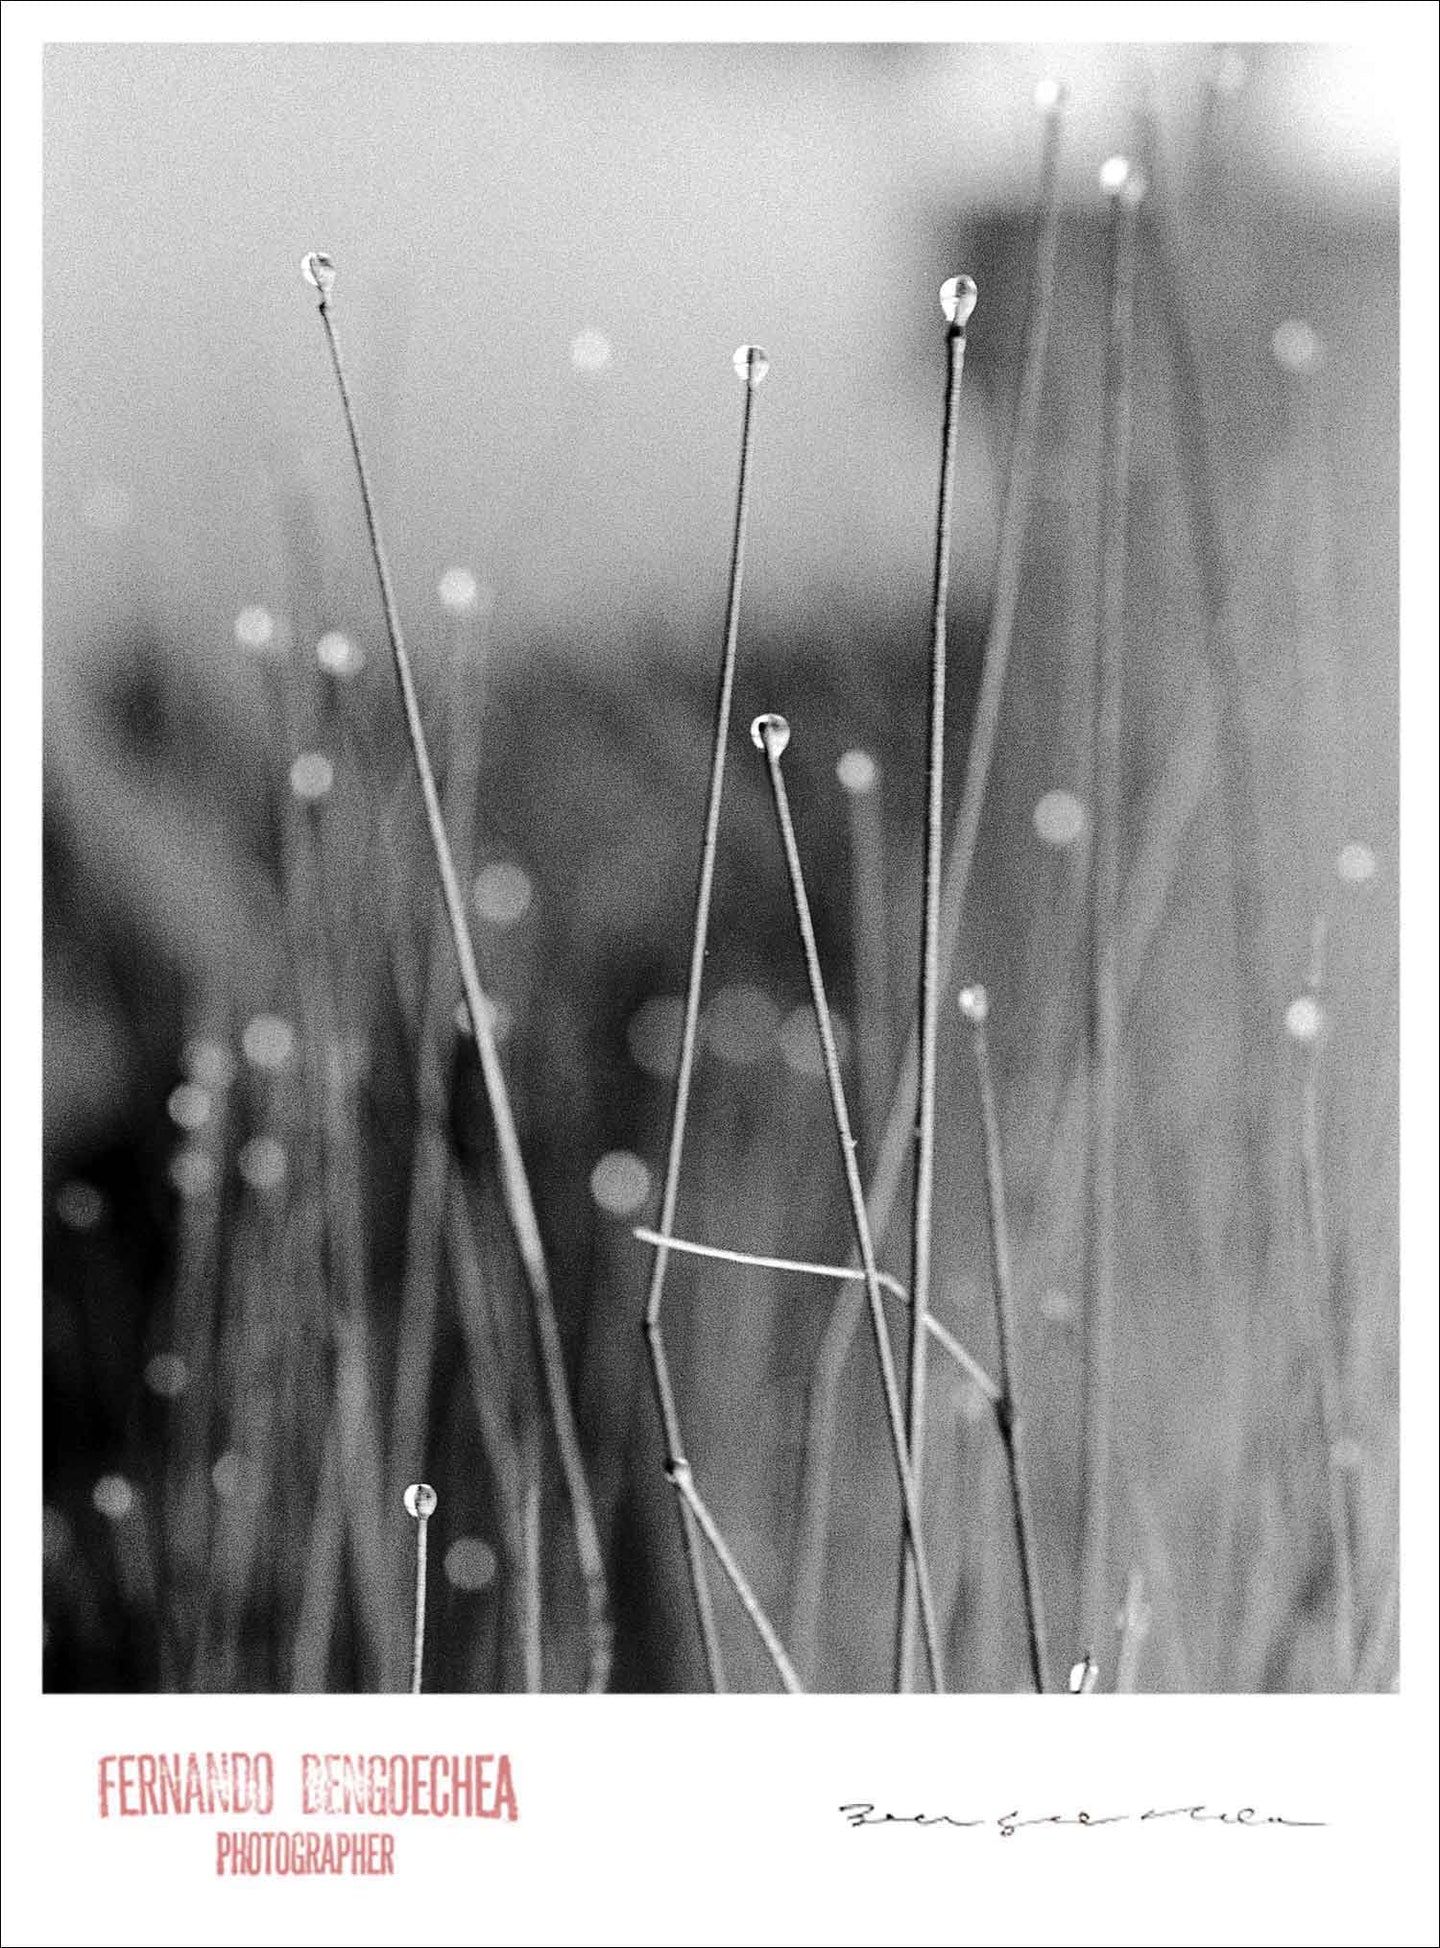 MORNING DEW - Giclee Print - Stamped and Signed